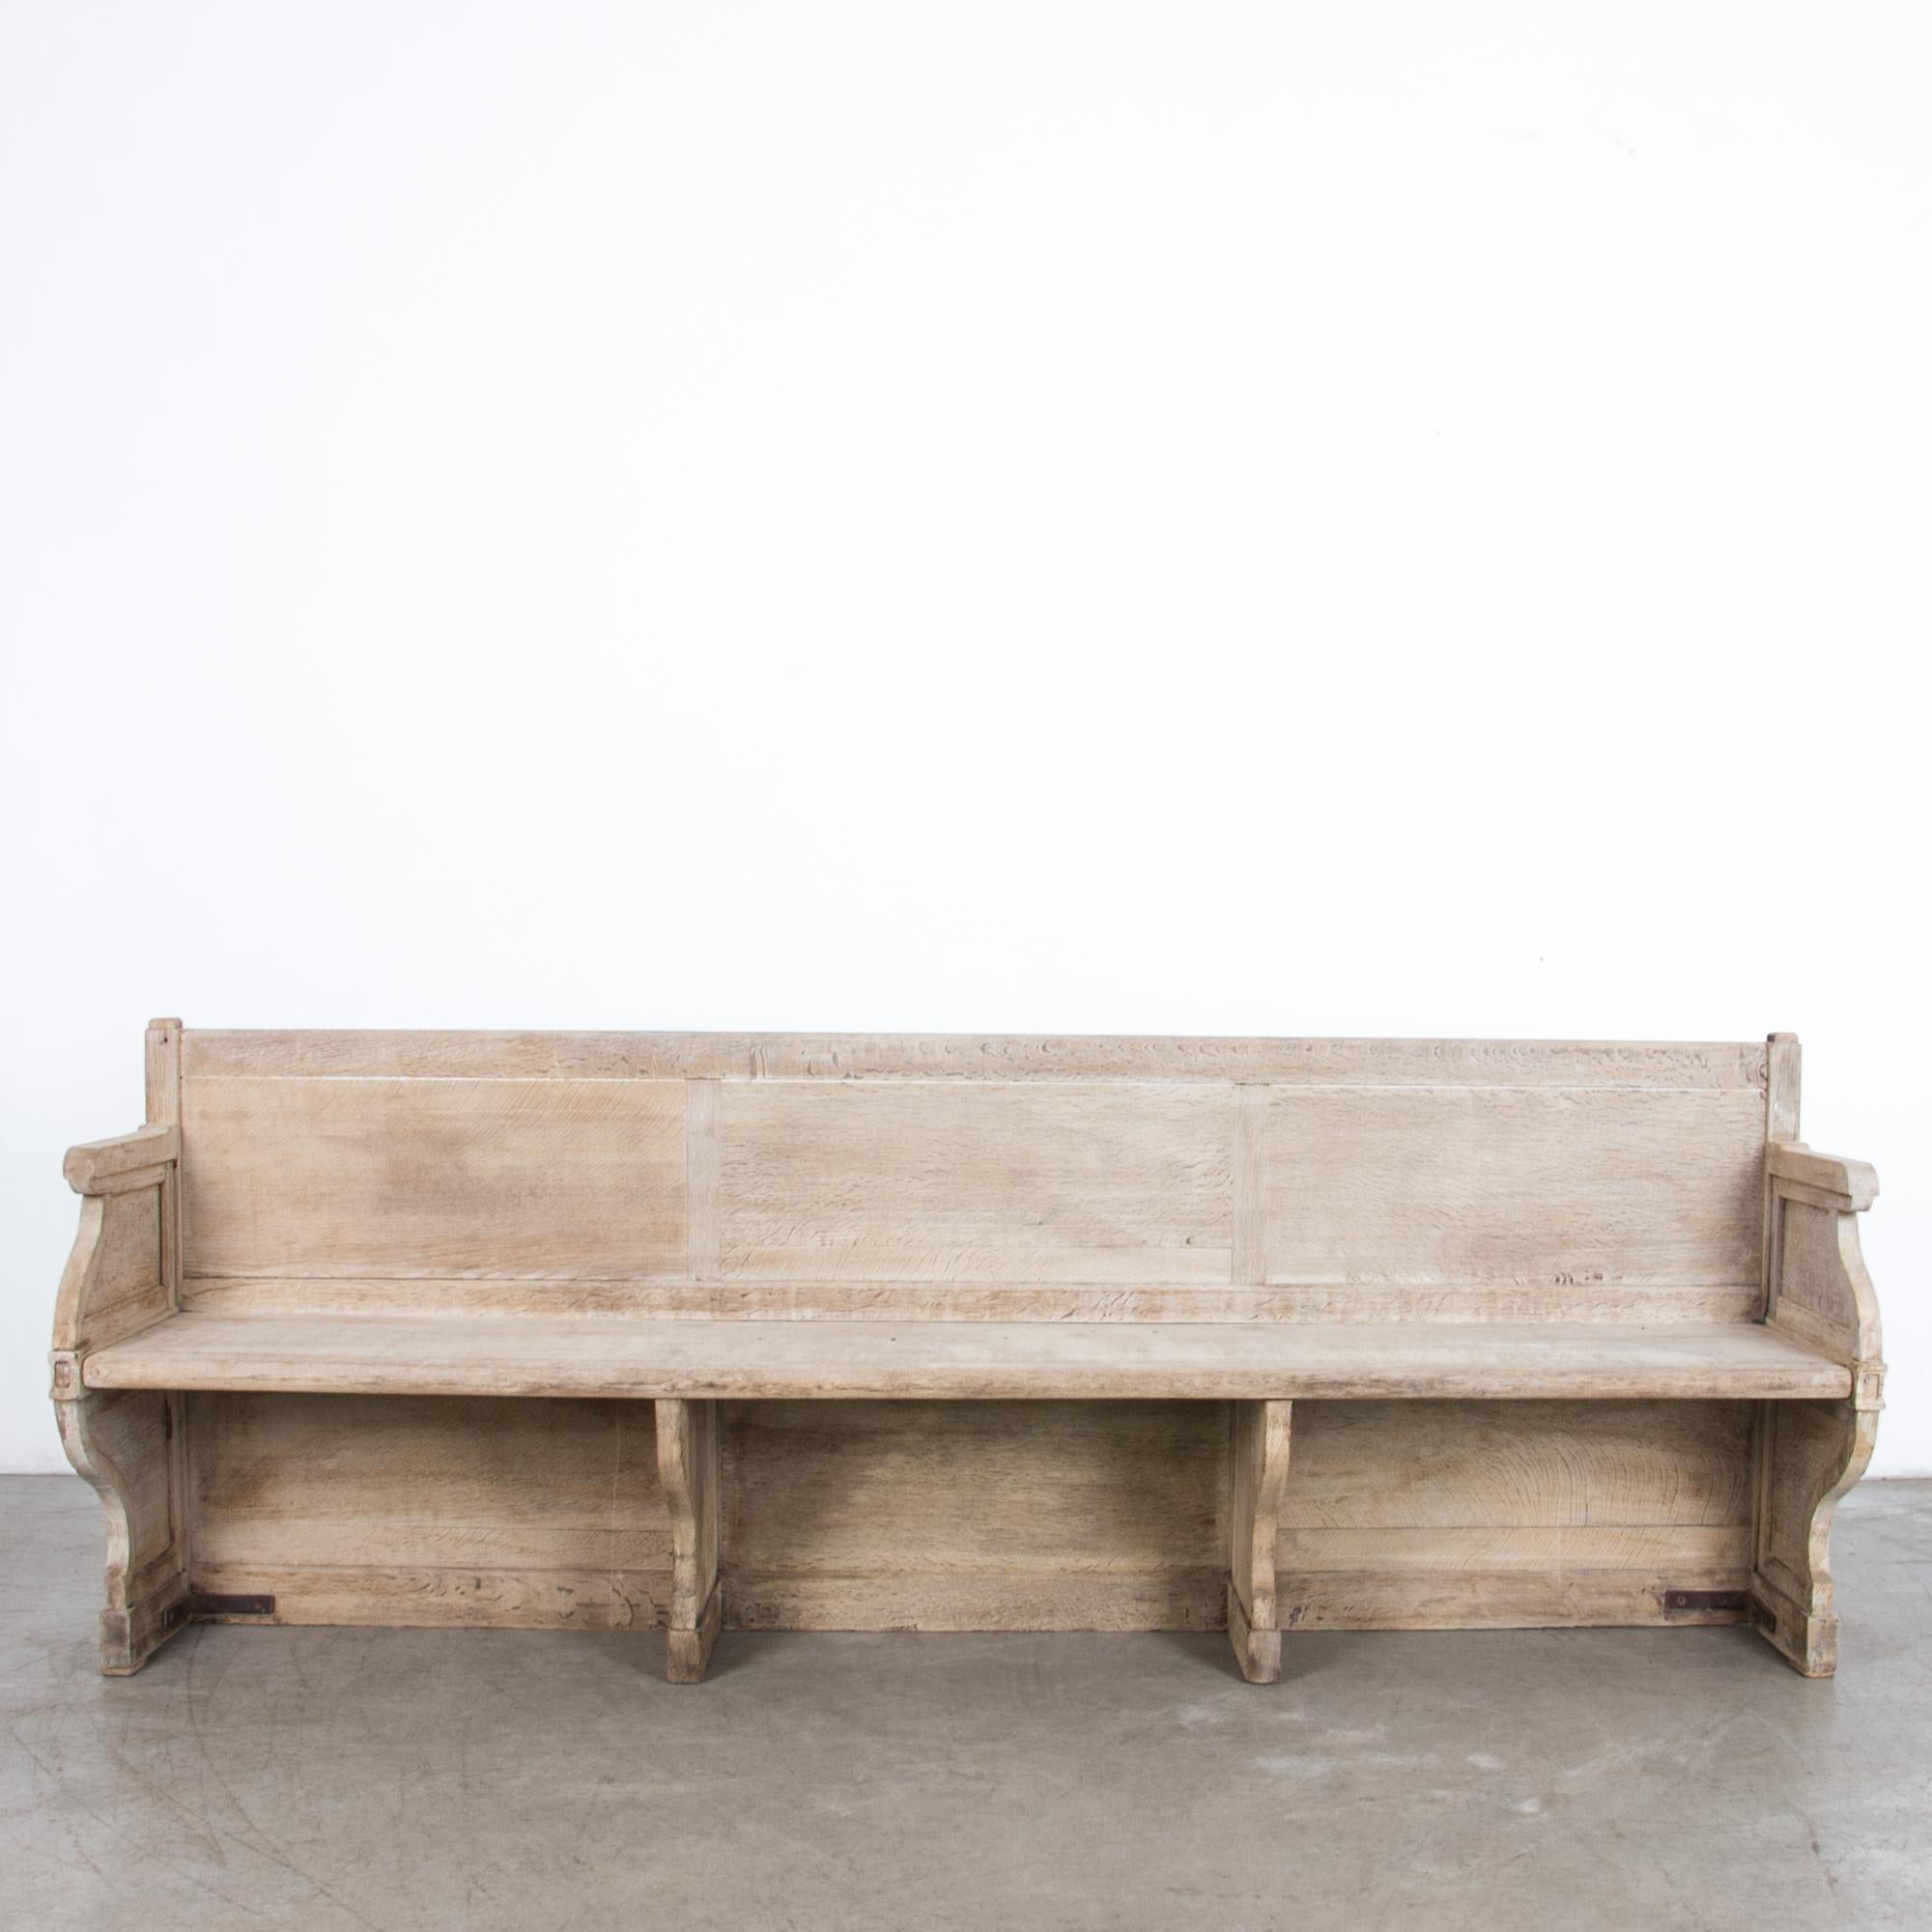 A late 19th century bench from France, circa 1880. Frame and panel construction gives this piece a durable structure and charming curved shape. Rustic texture is lightened and refreshed with an updated oil and wax finish. Detailed construction in